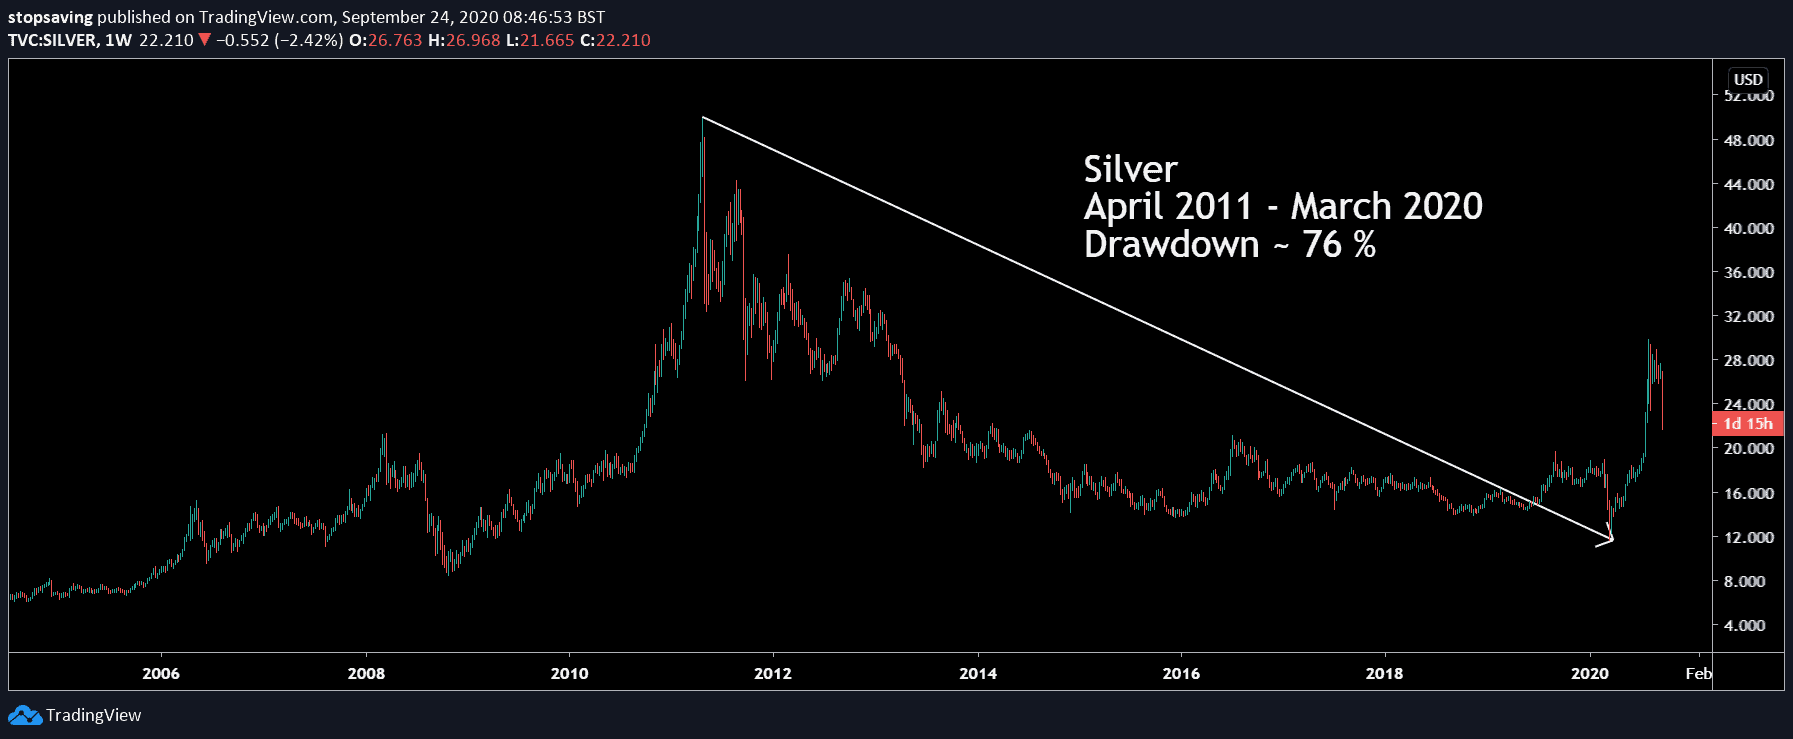 Chart showing the drawdown of silver